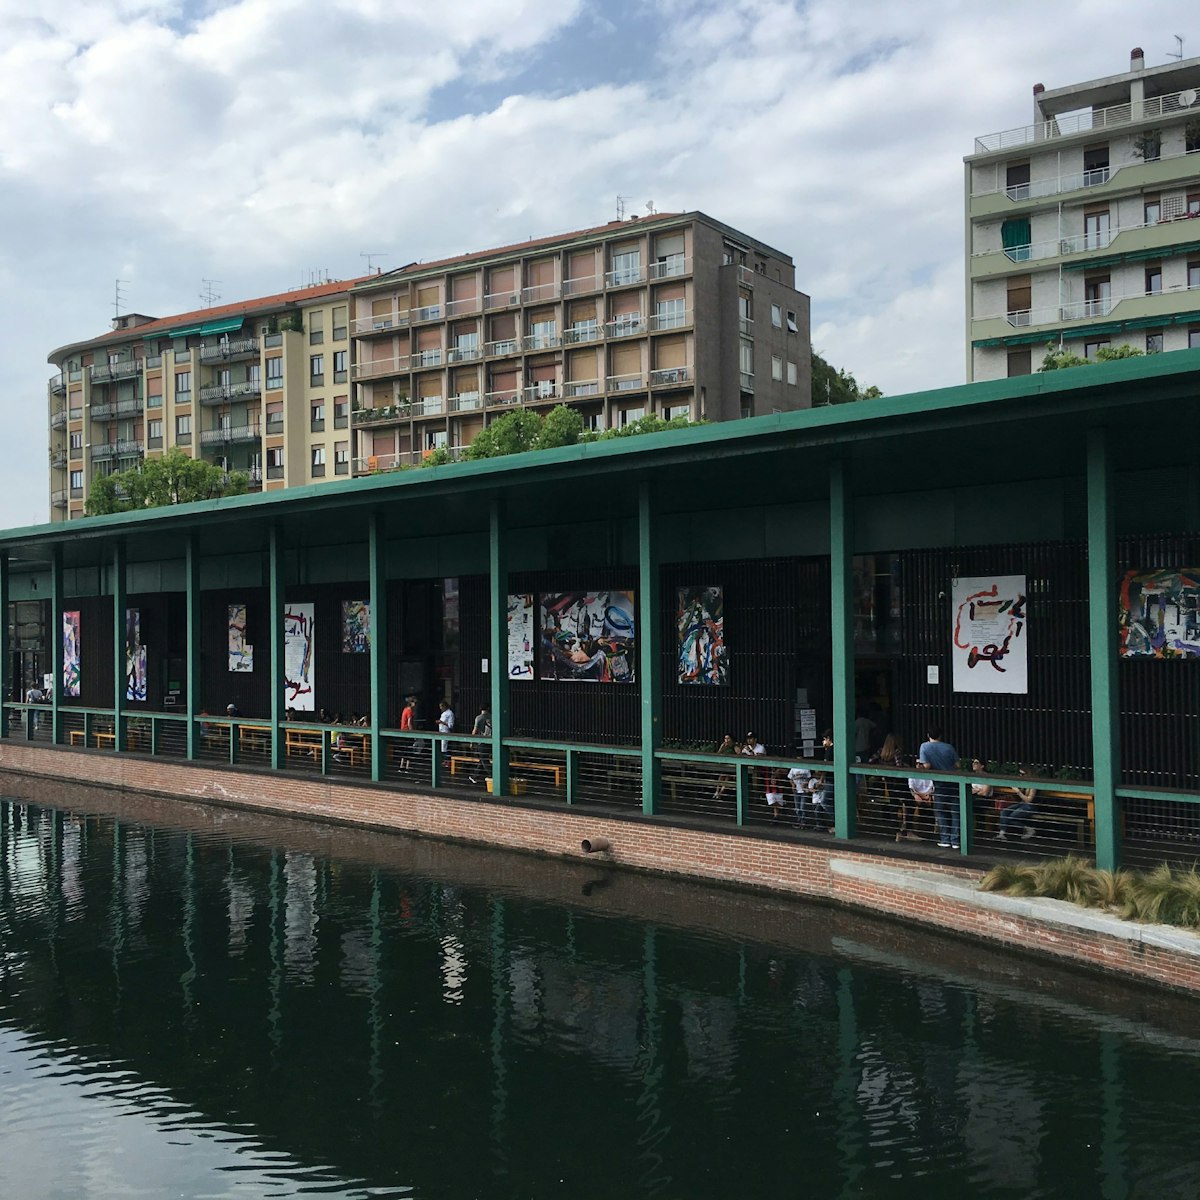 View of the Mercato Comunale from across the Darsena.